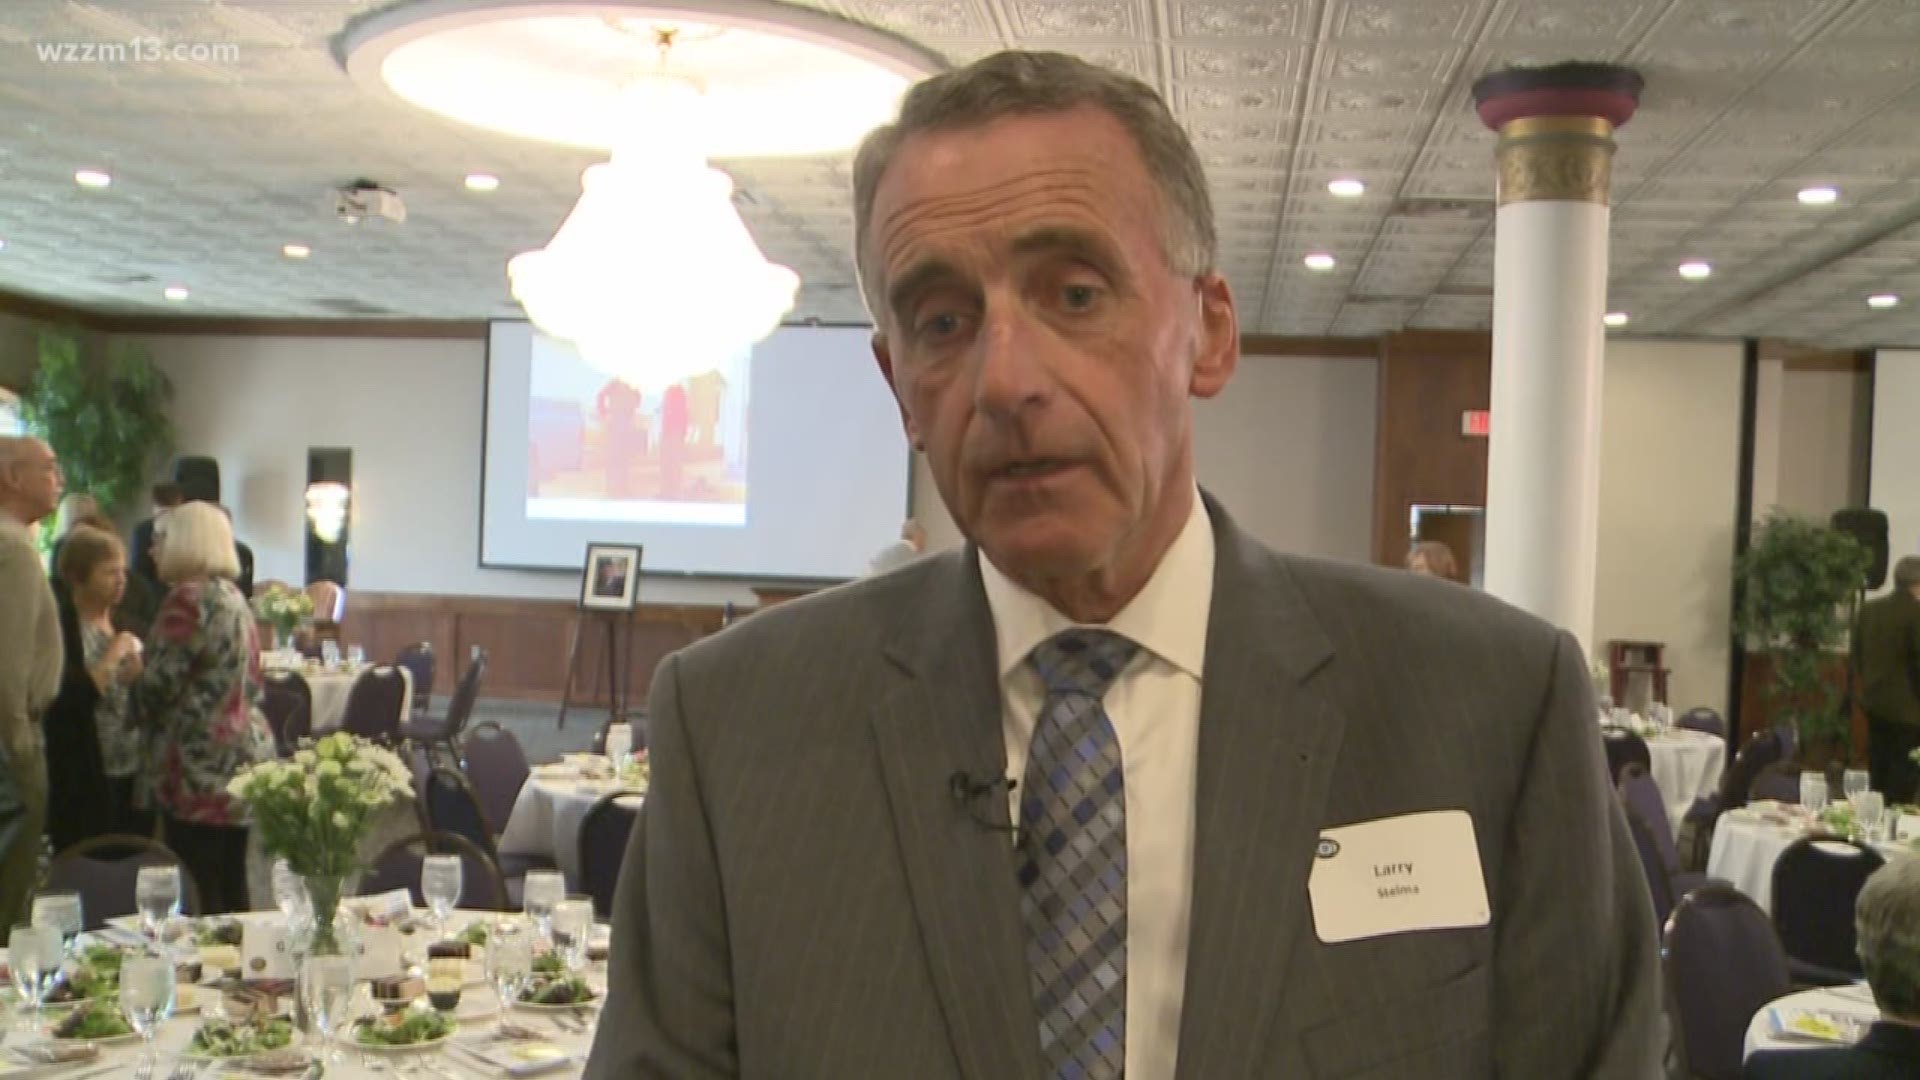 Party held for retiring Kent County Sheriff Stelma